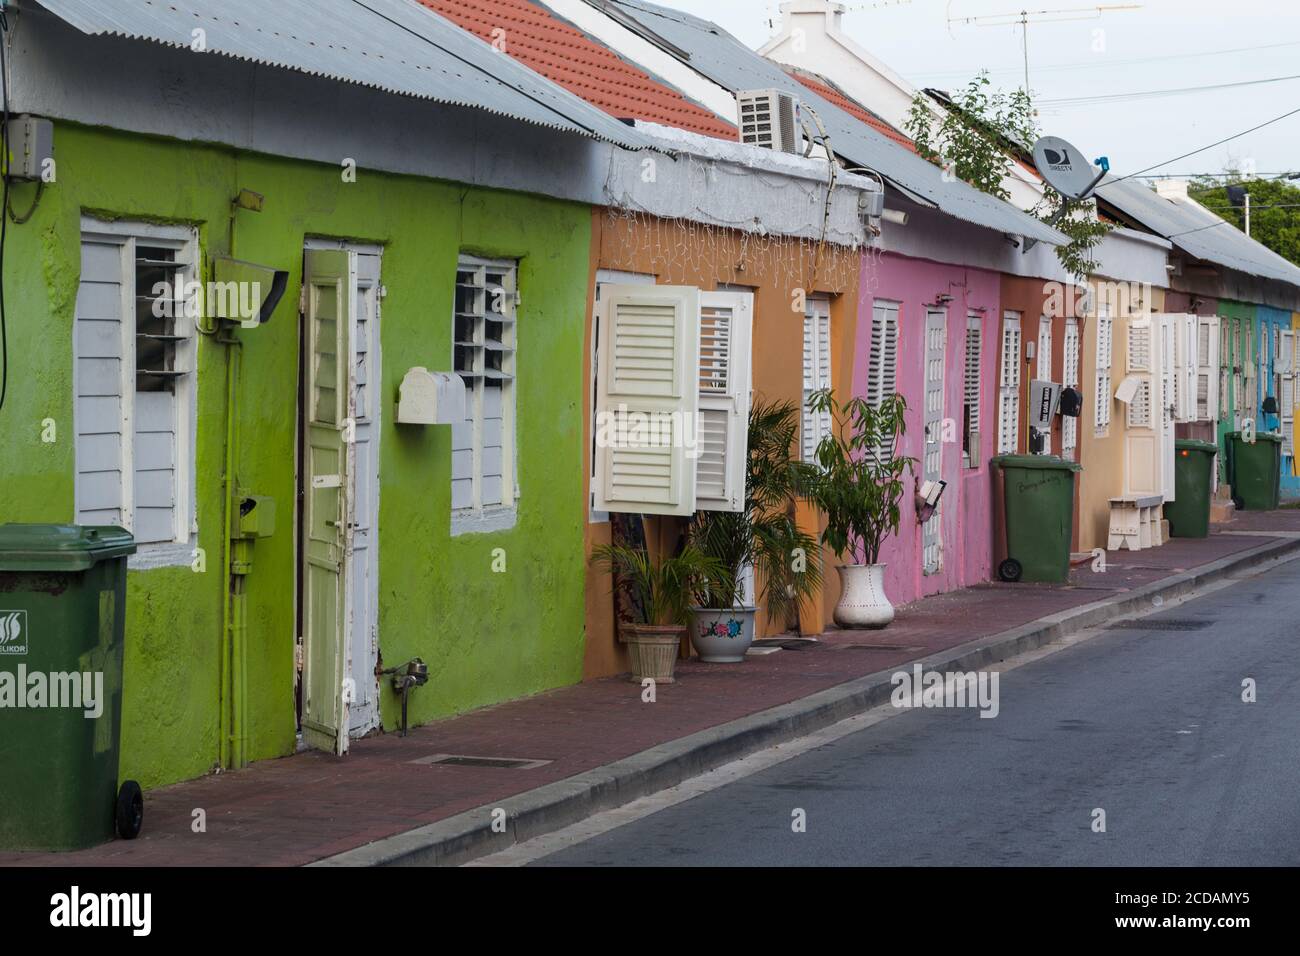 Colorful late 19th century row houses in a poorer neighborhood in Willemstad, the capital of the Caribbean island of Curacao in the Netherlands Antill Stock Photo